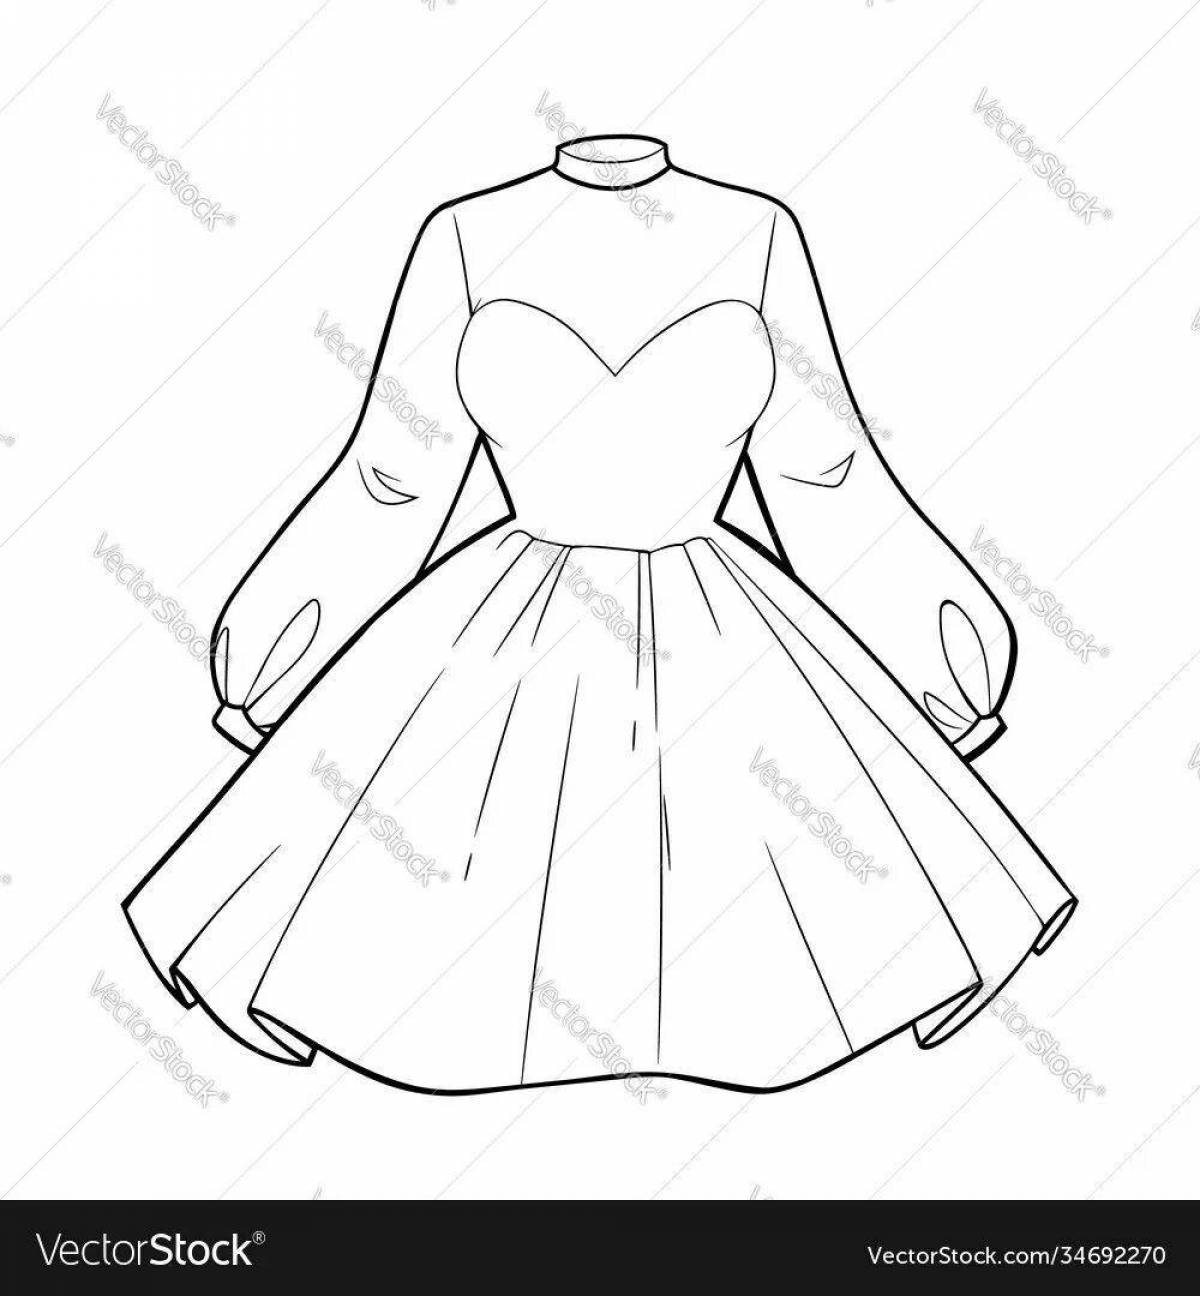 Adorable puffy dress coloring book